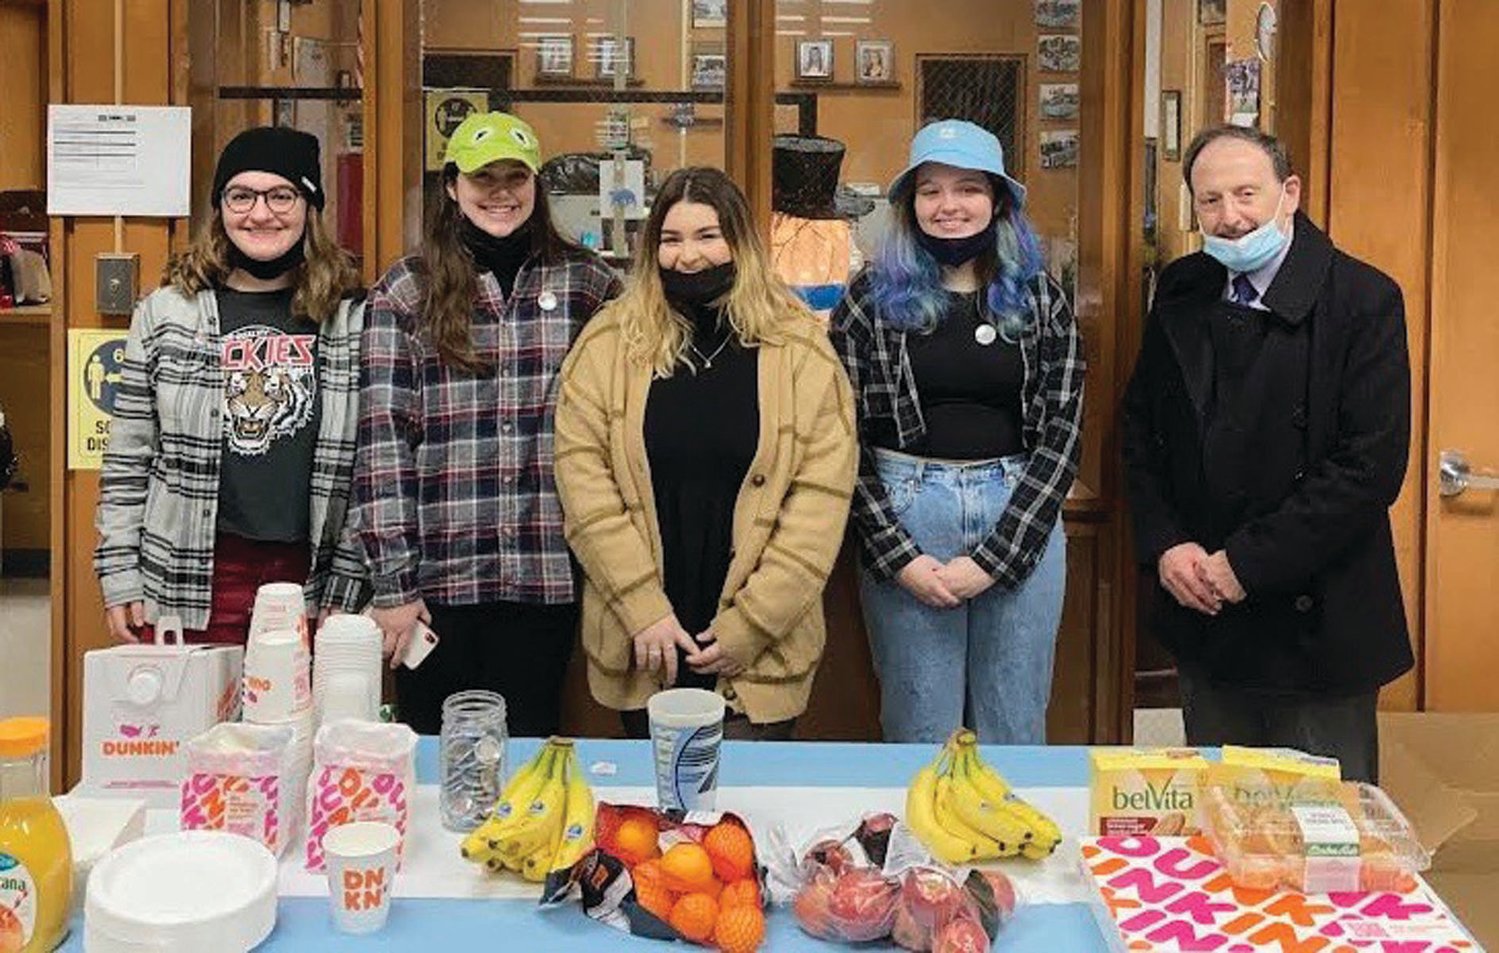 SUPER SPECIAL SERVERS: Dr. Bernard DiLullo, Superintendent of Schools in Johnston, was on hand to show support for last Friday’s JHS Music Department Crazy Hat Day that featured coffee, juice and pastry items served by students Maya Ferreira, Mackenzie Hanna, Destinee Costa and Trinity Biondi.